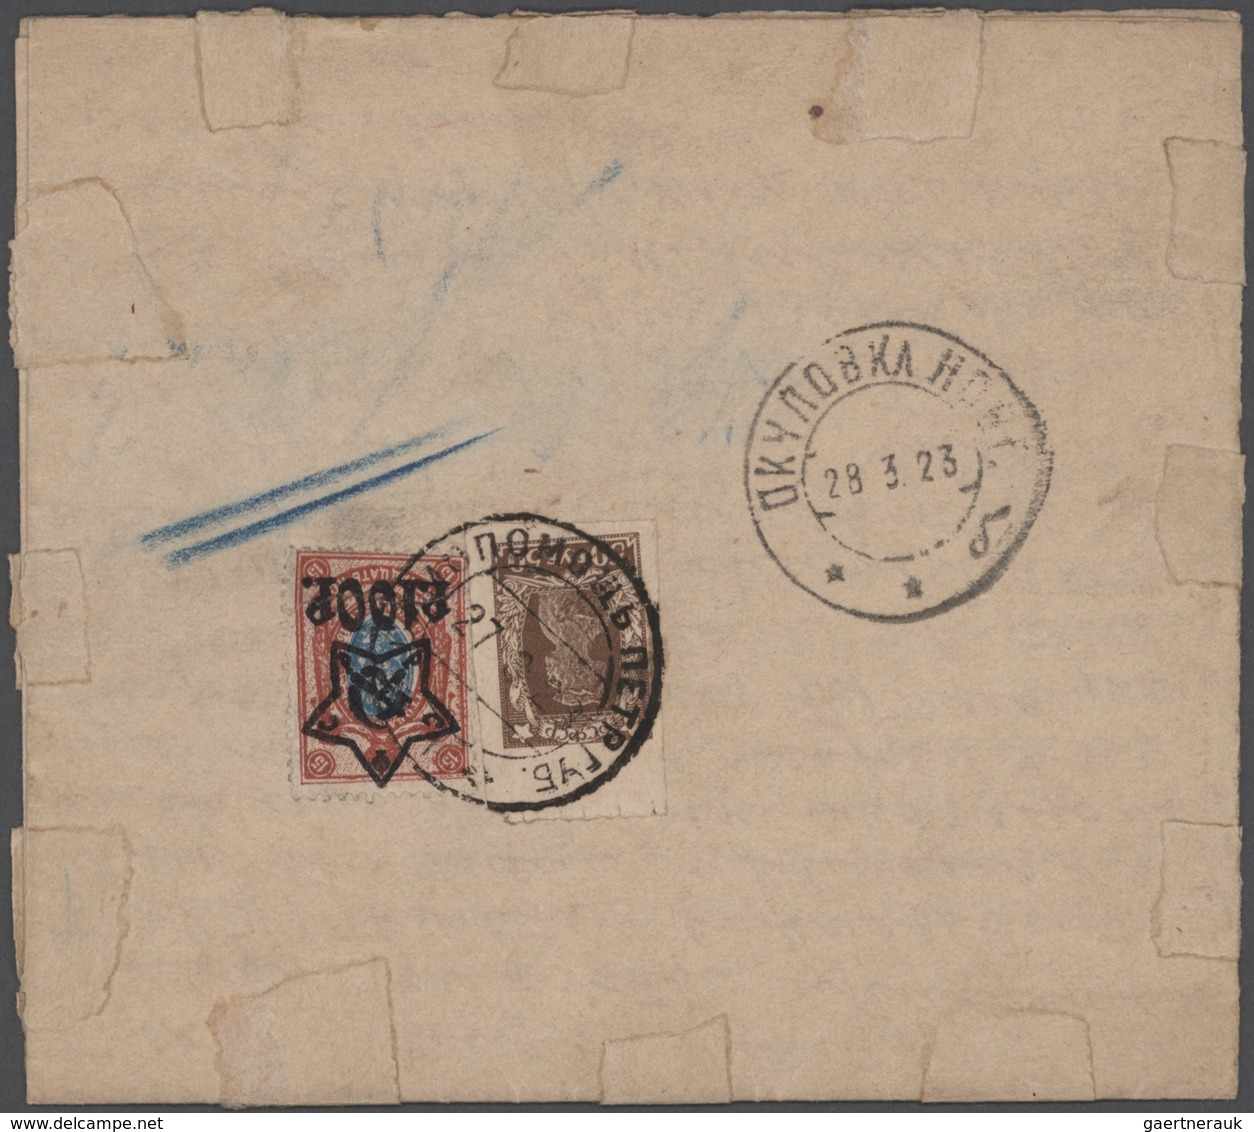 Sowjetunion: 1917/23, fantastic three-volume collection of approx. 177 letters (incl. provisional le